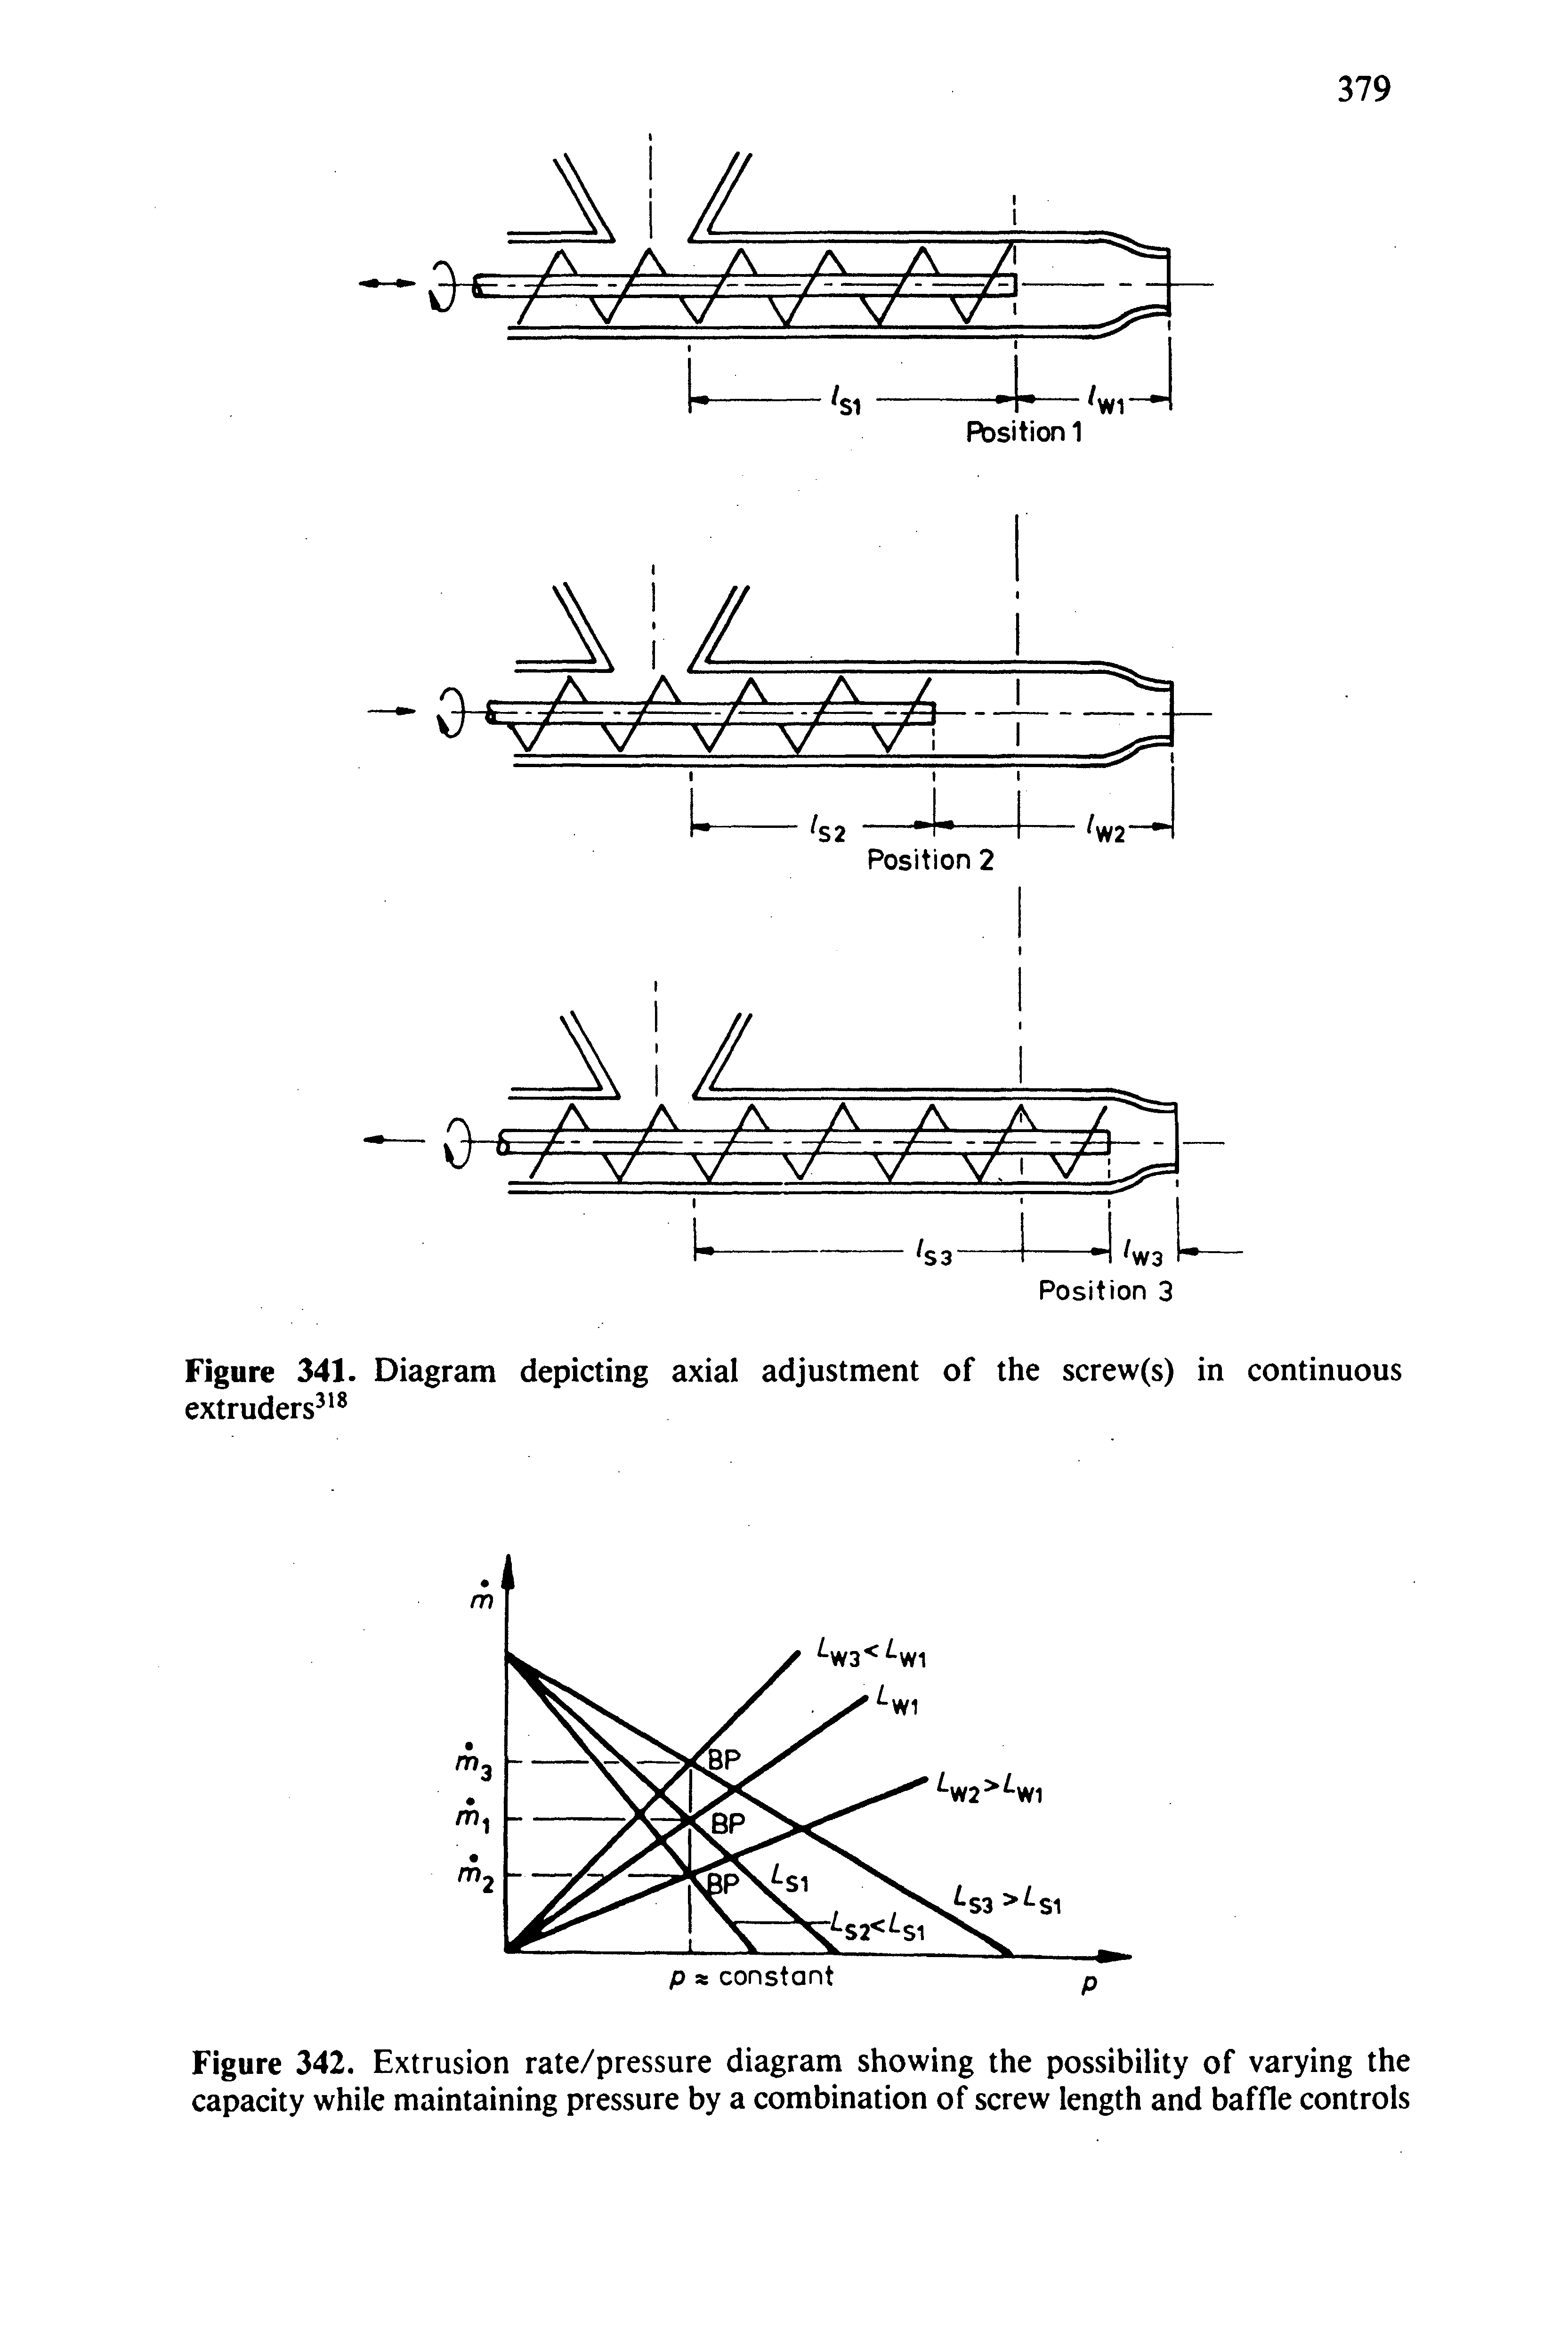 Figure 341. Diagram depicting axial adjustment of the screw(s) in continuous extruders ...